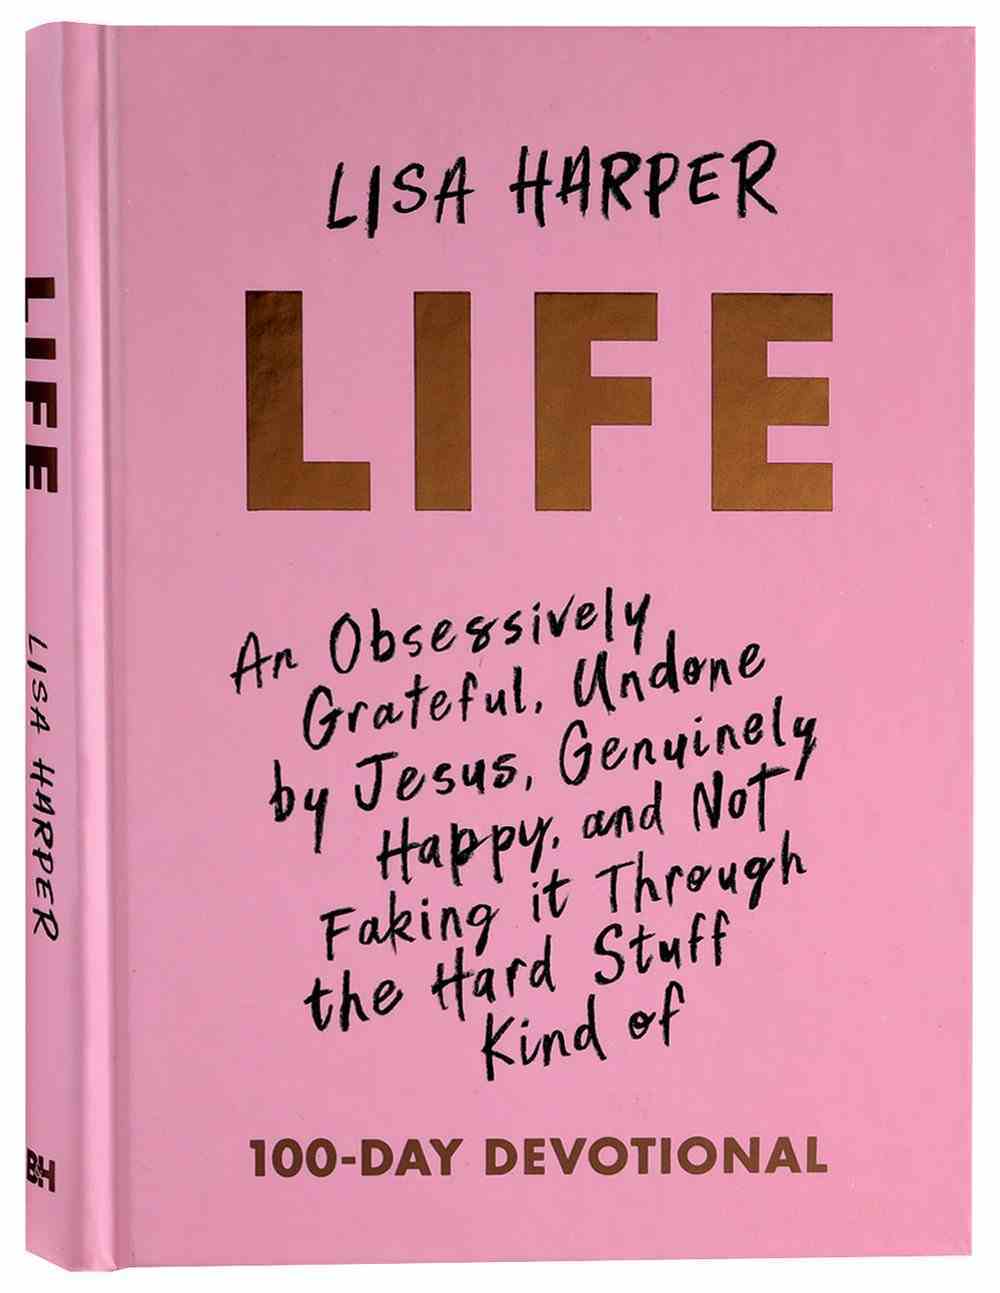 Life: An Obsessively Grateful, Undone By Jesus, Genuinely Happy, and Not Faking It Through the Hard Stuff Kind of Devotional Hardback